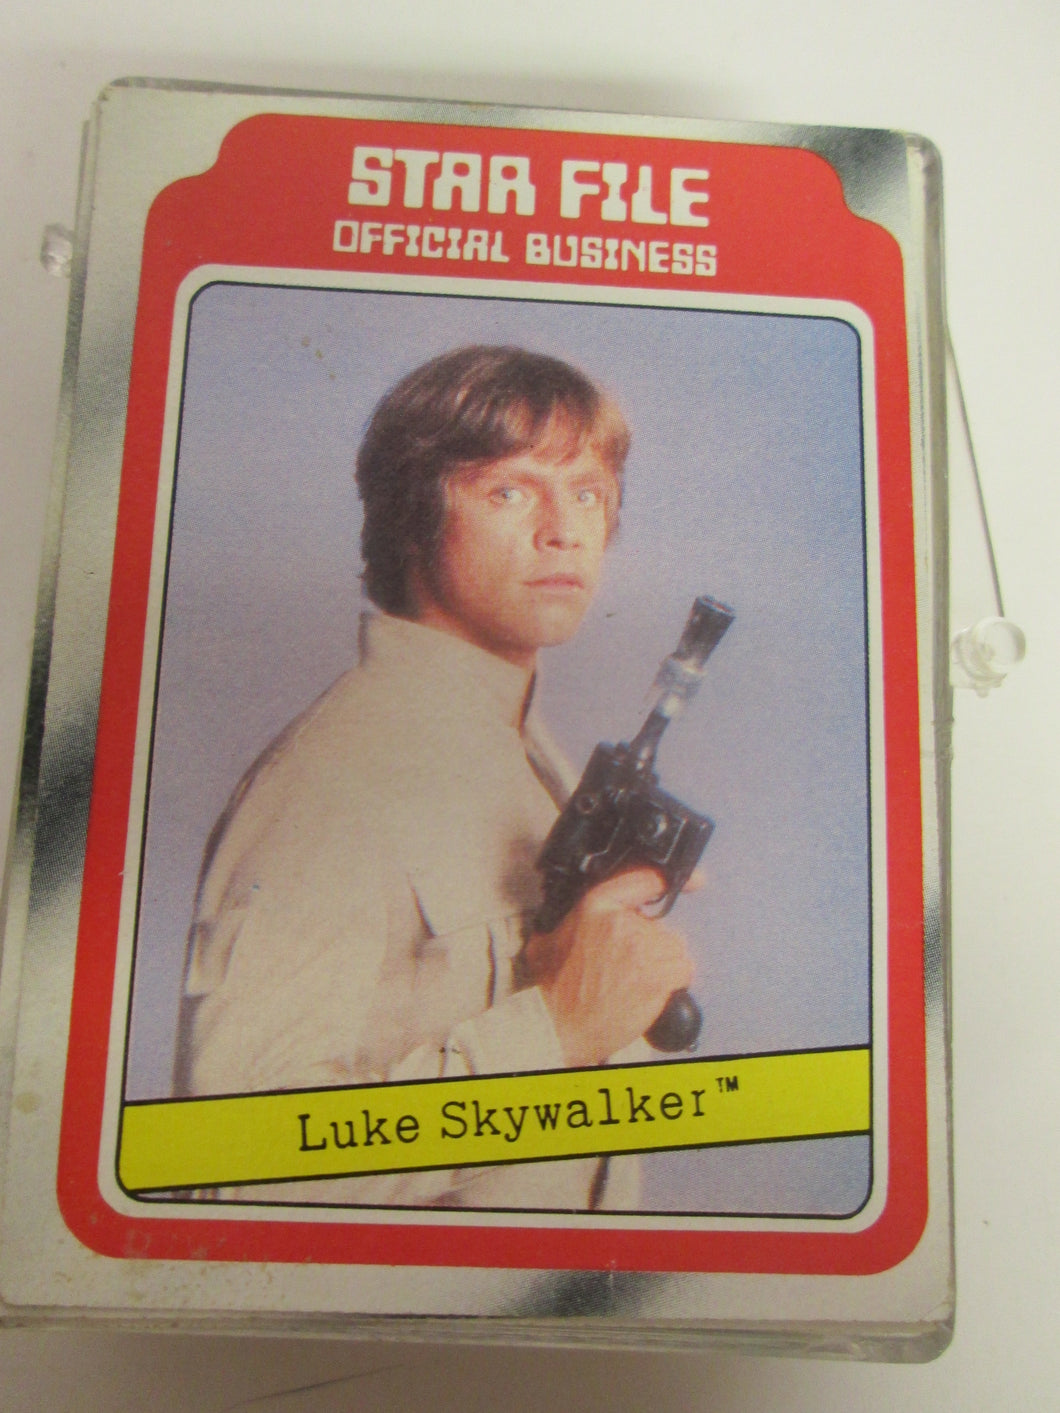 Empire Strikes Back Movie Cards 53 Assorted numbers 1980